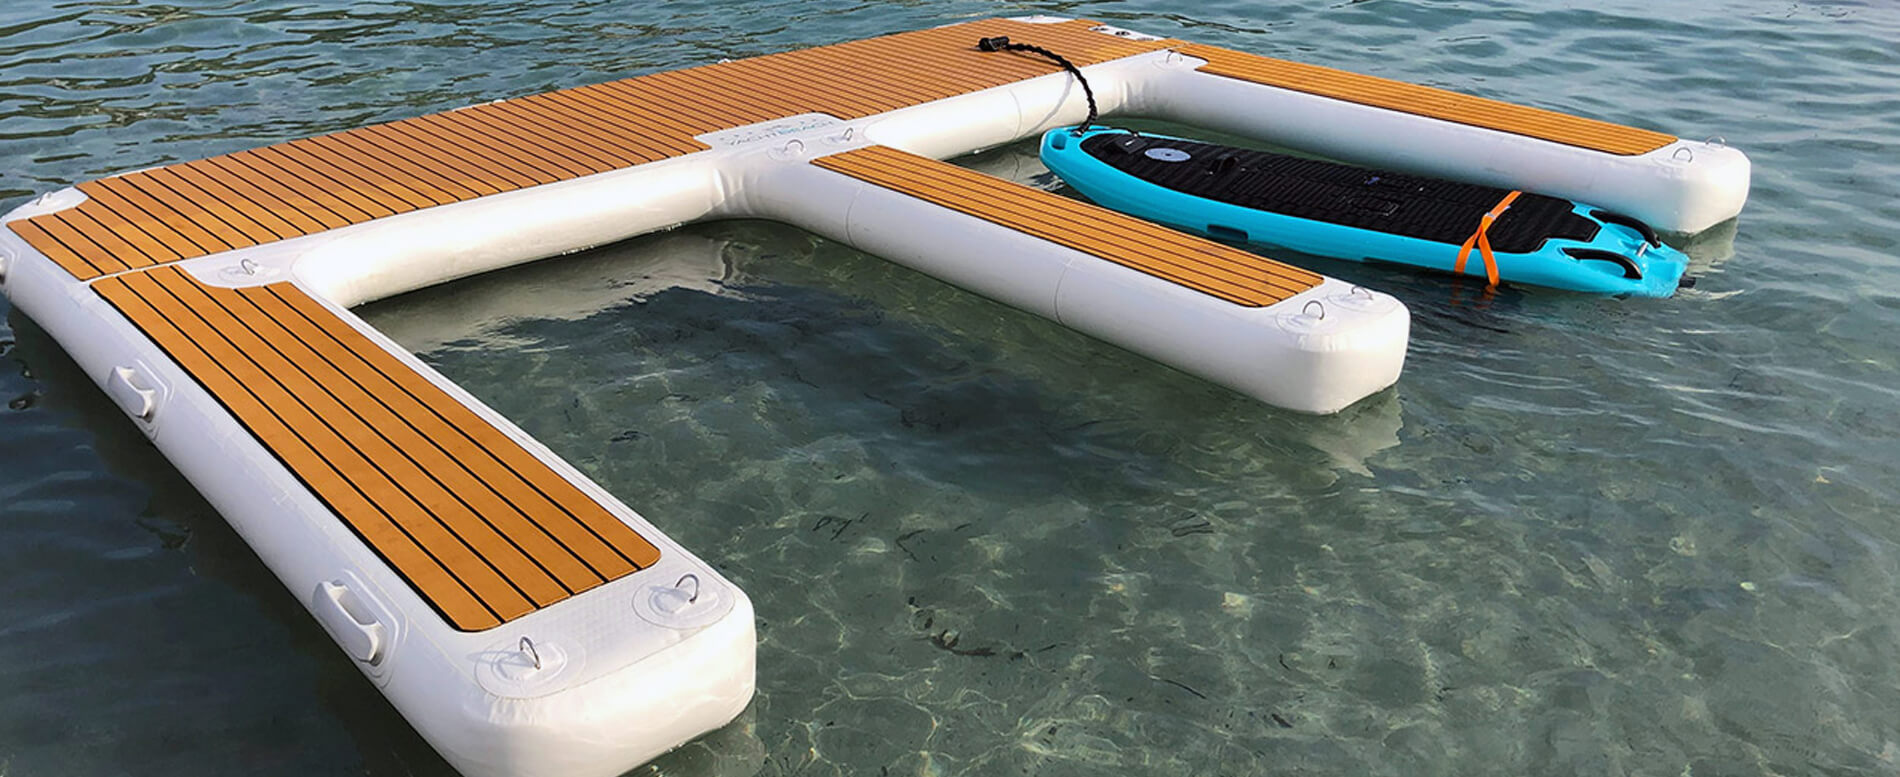 The Best Dock Accessories to Add Now